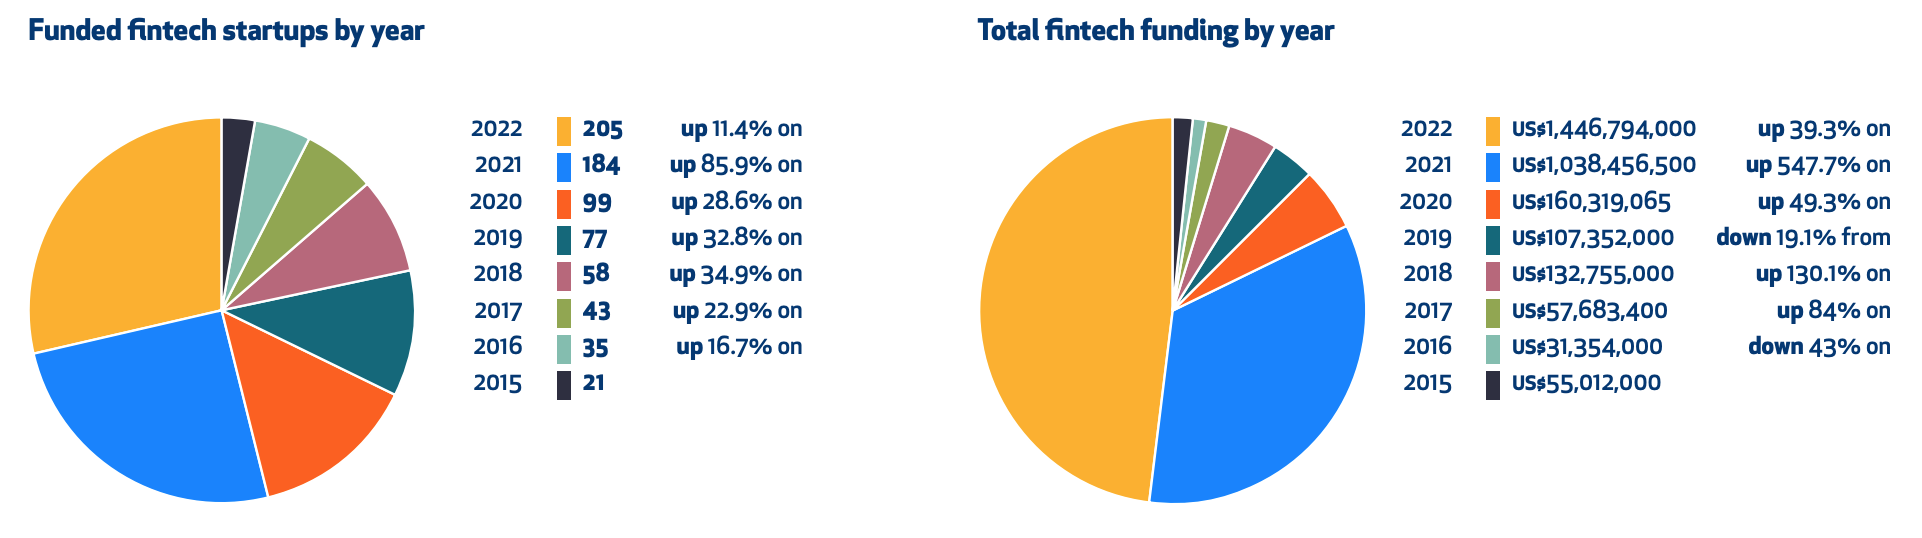 Fintech funding in Africa by year, Source: African Tech Startups Funding Report 2023, Disrupt Africa, Feb 2023